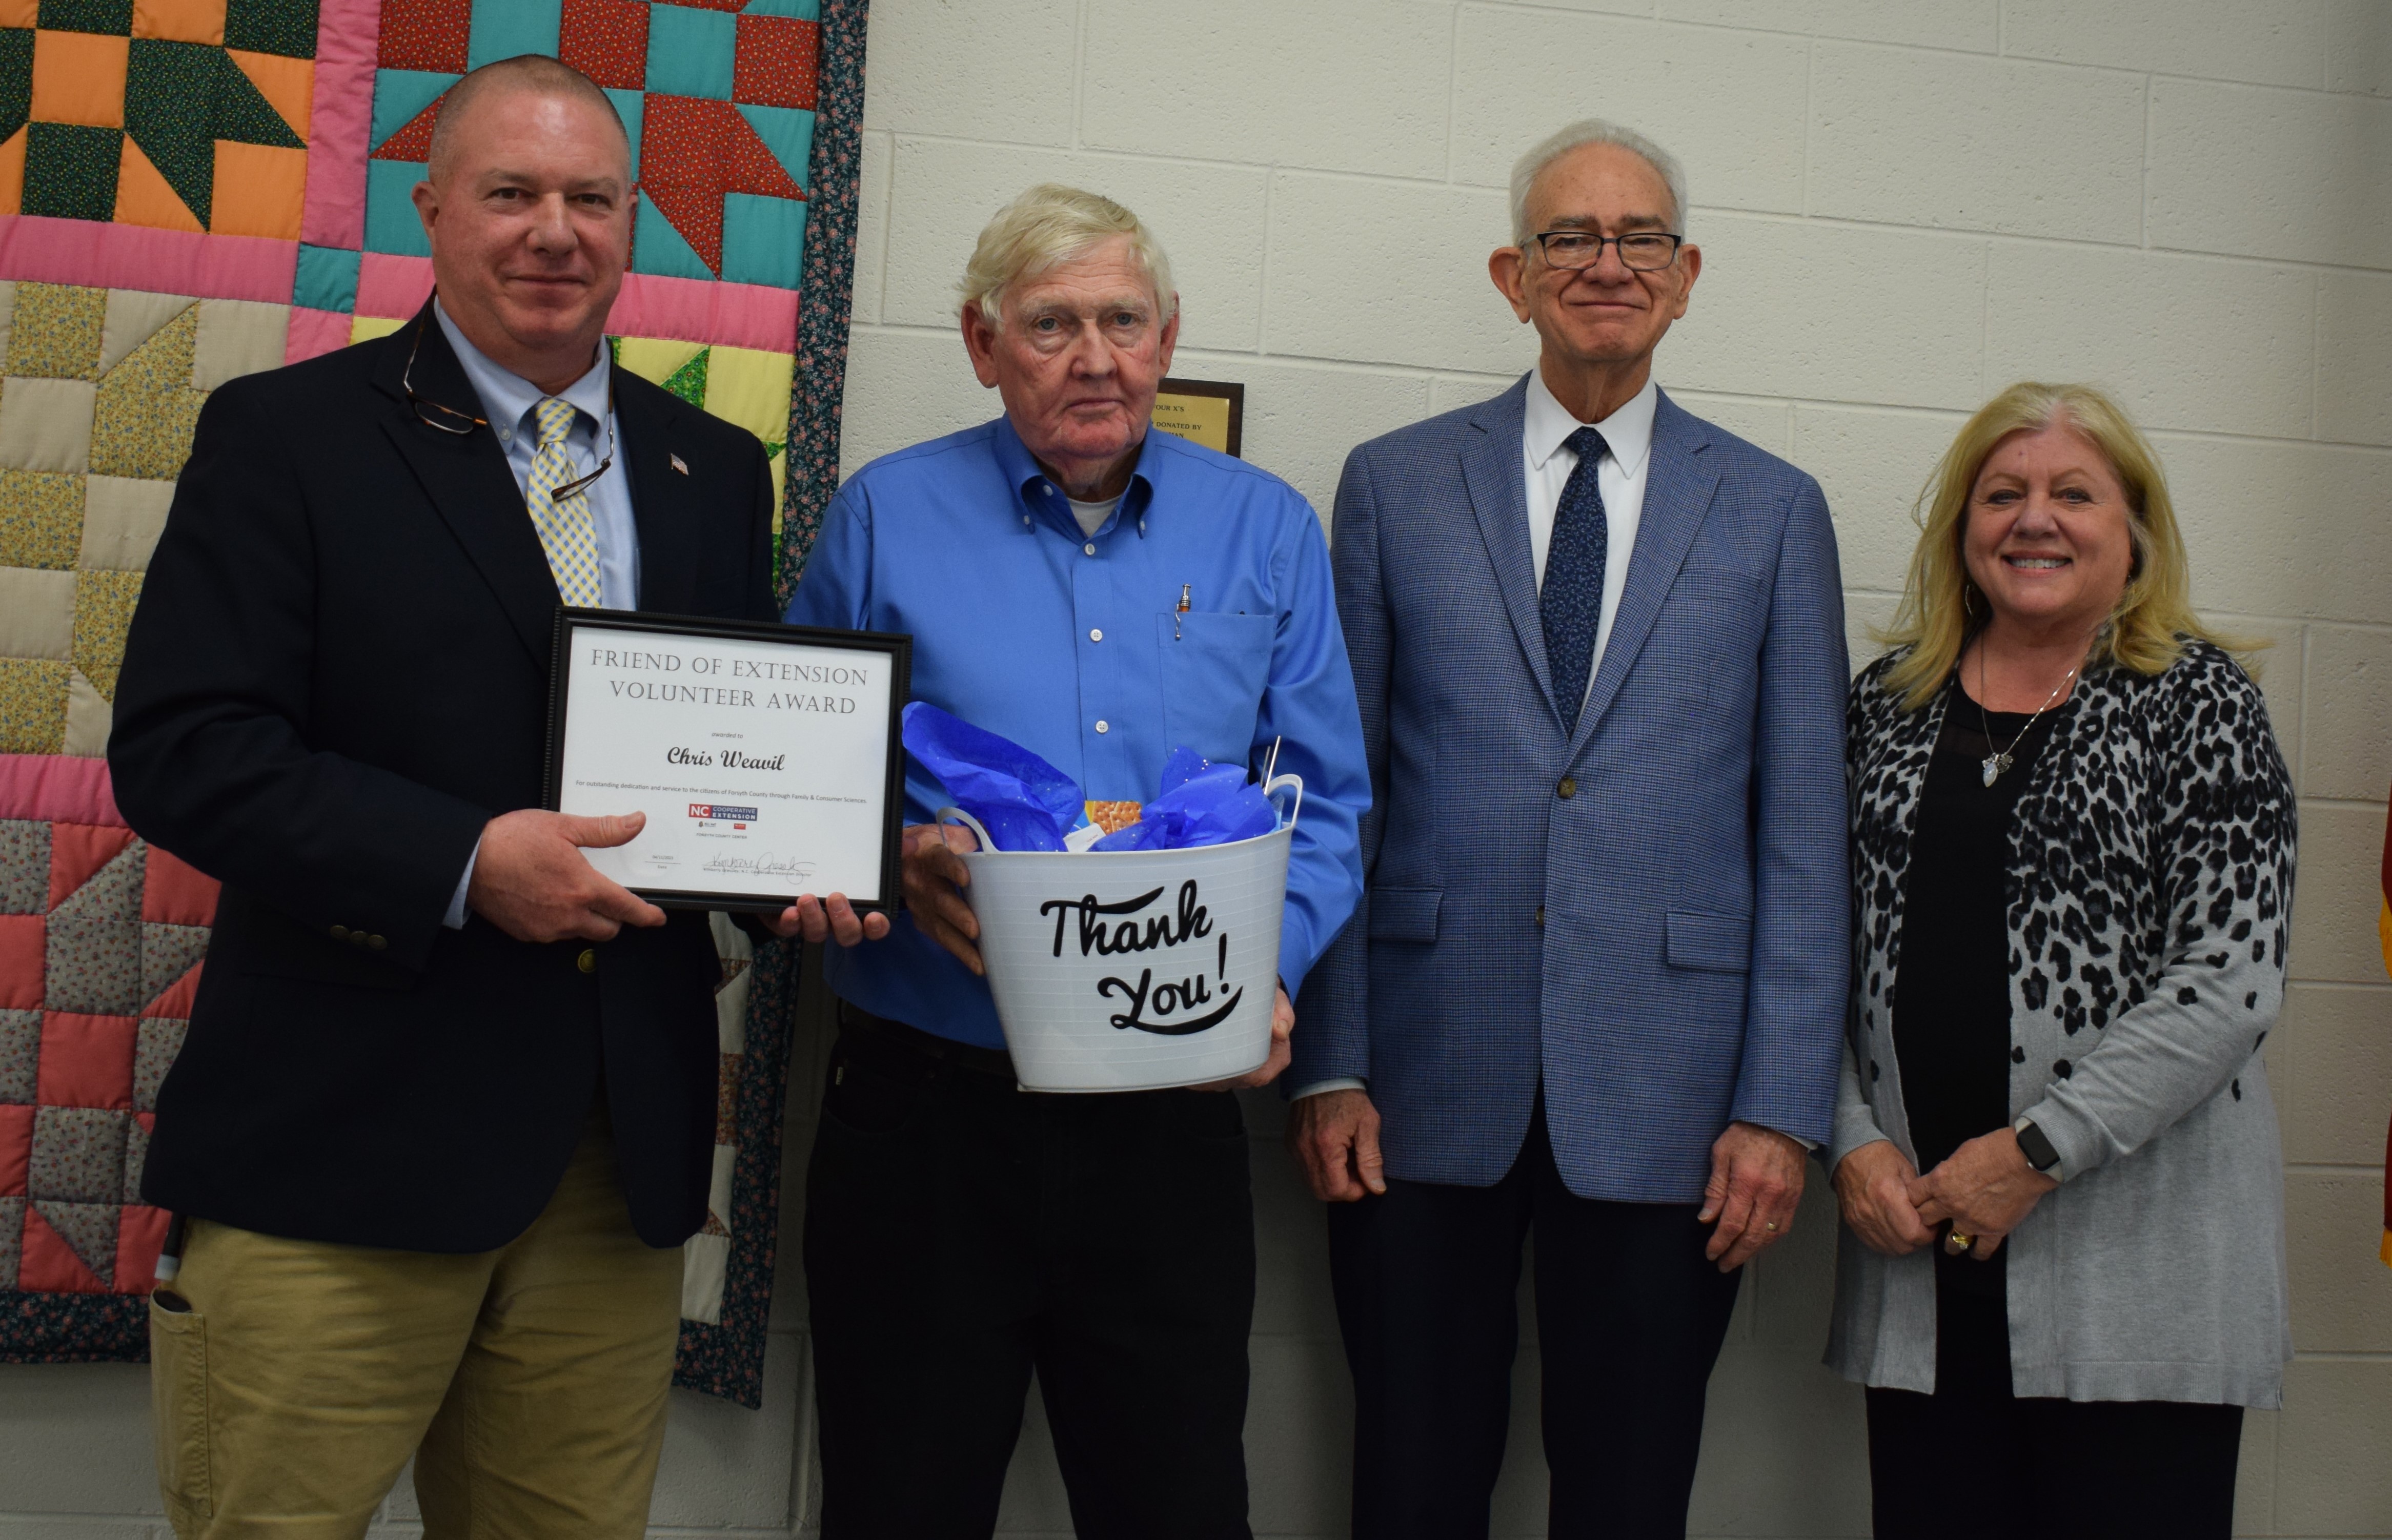 Friend of Extension Award Recipient, Chris Weavil with County Extension Director, Kim Gressley, and Forsyth County Commissioners Richard Linville and Dr. Don Martin